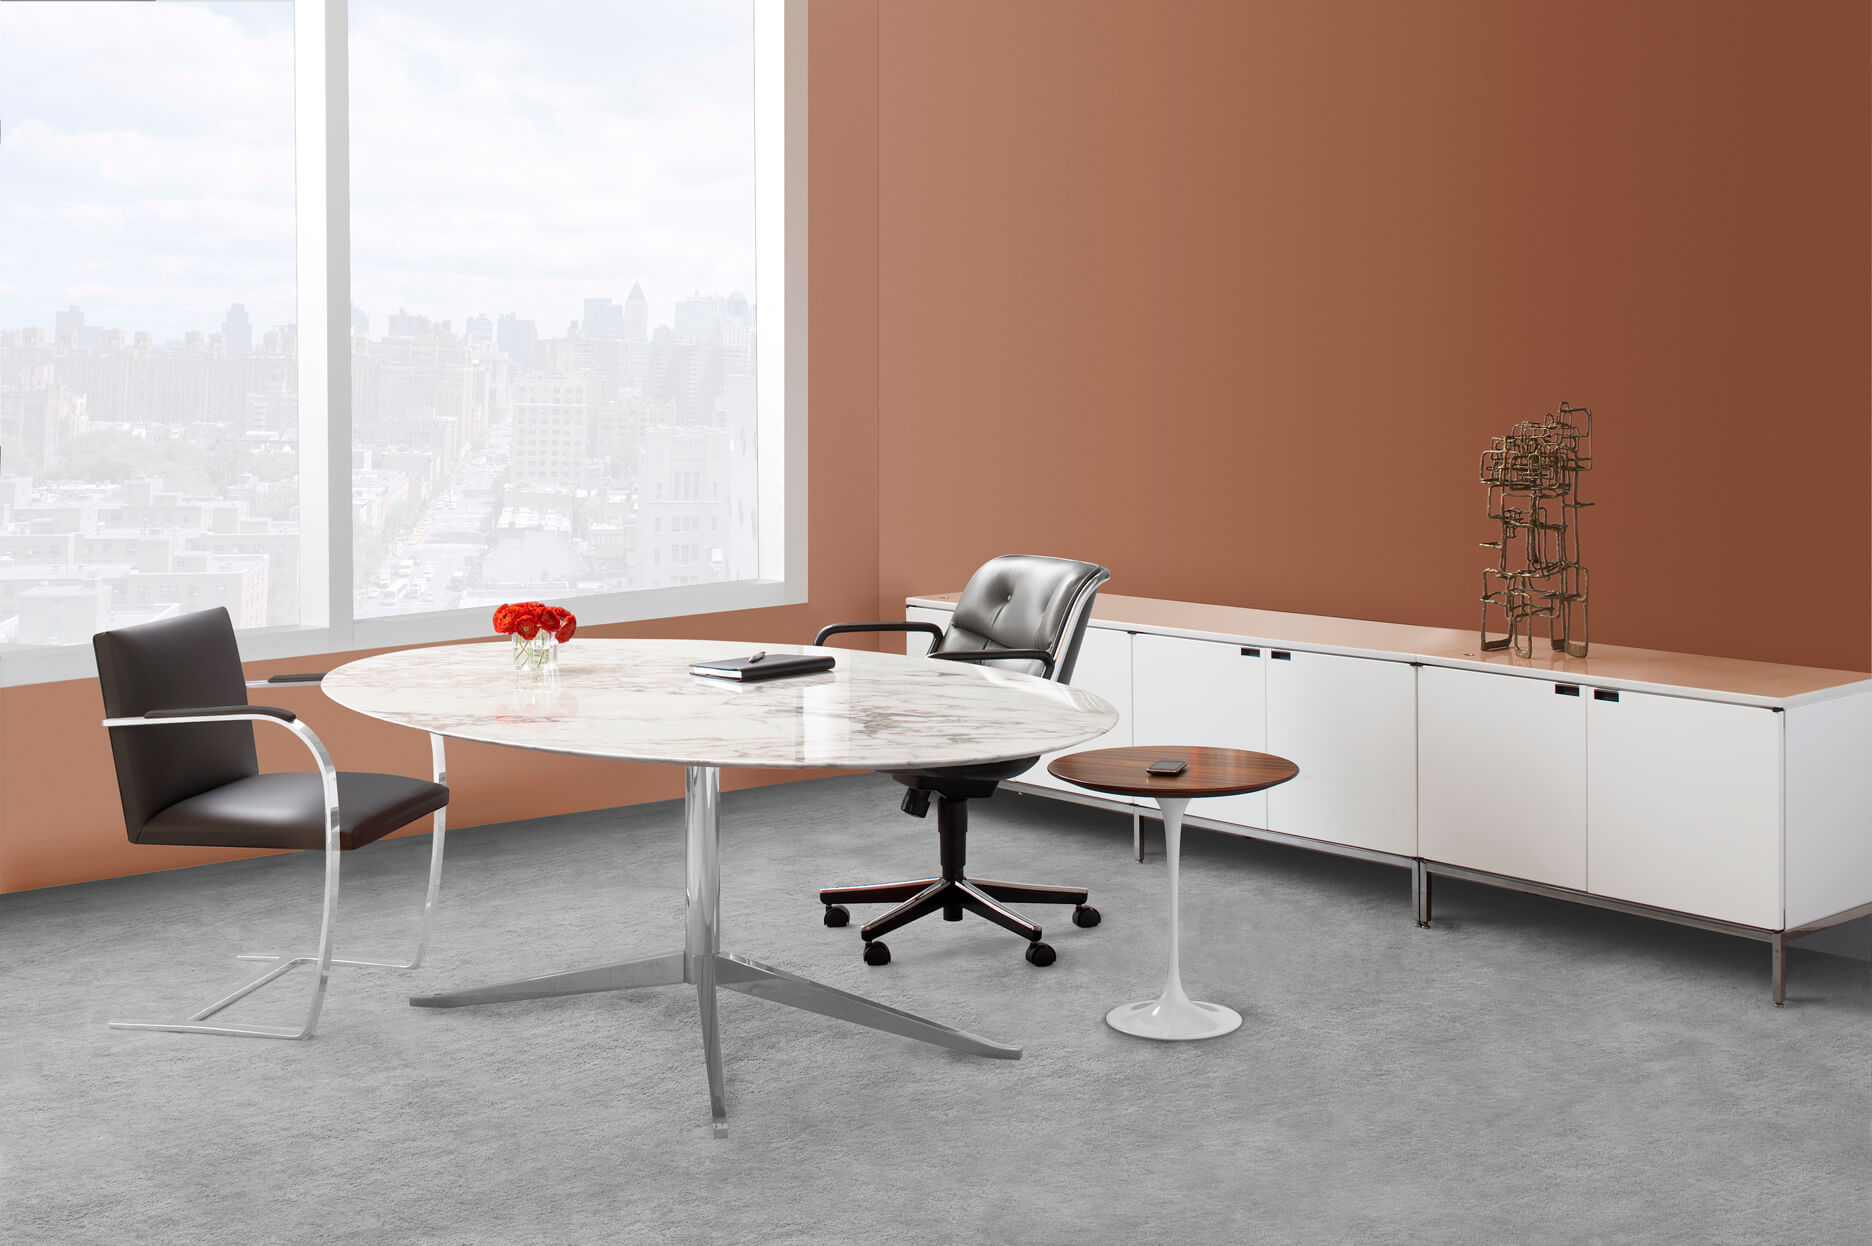 Florence Knoll desk in an office